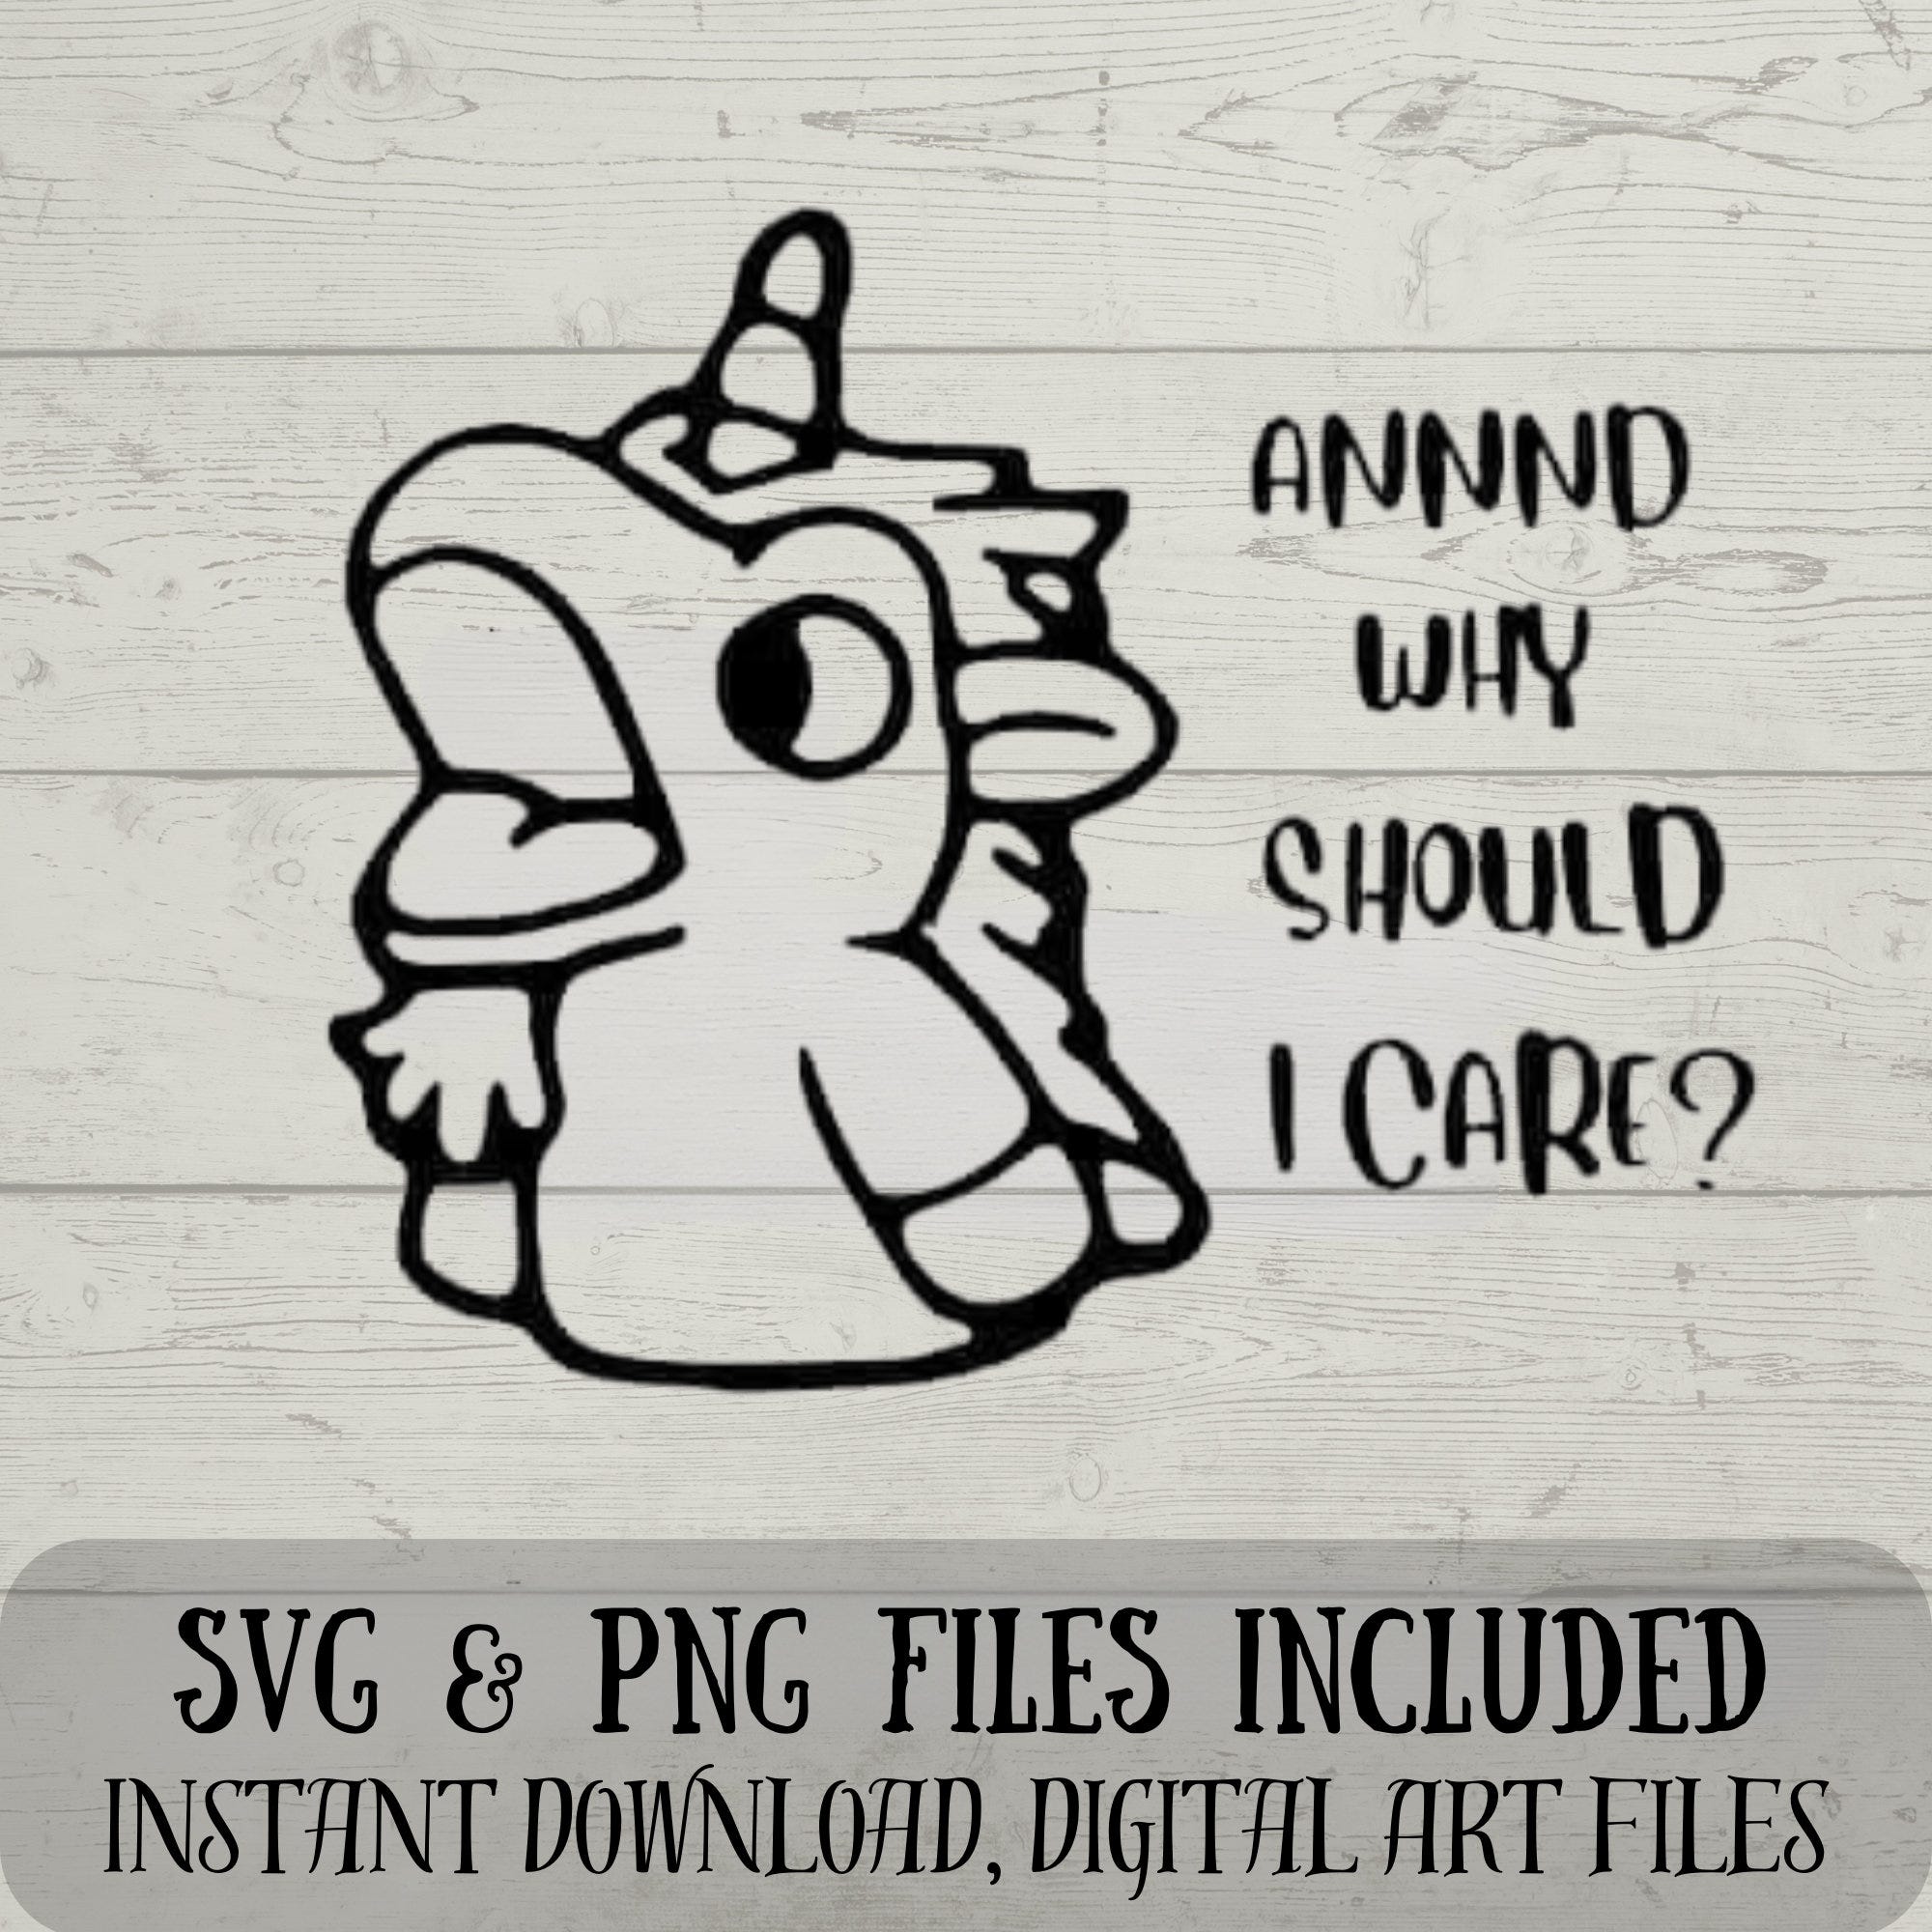 Why Should I Care? Unicorse SVG - Bluey SVG - Unicorse from Bluey SVG - Digital Download - Fun Crafting - svg and png included